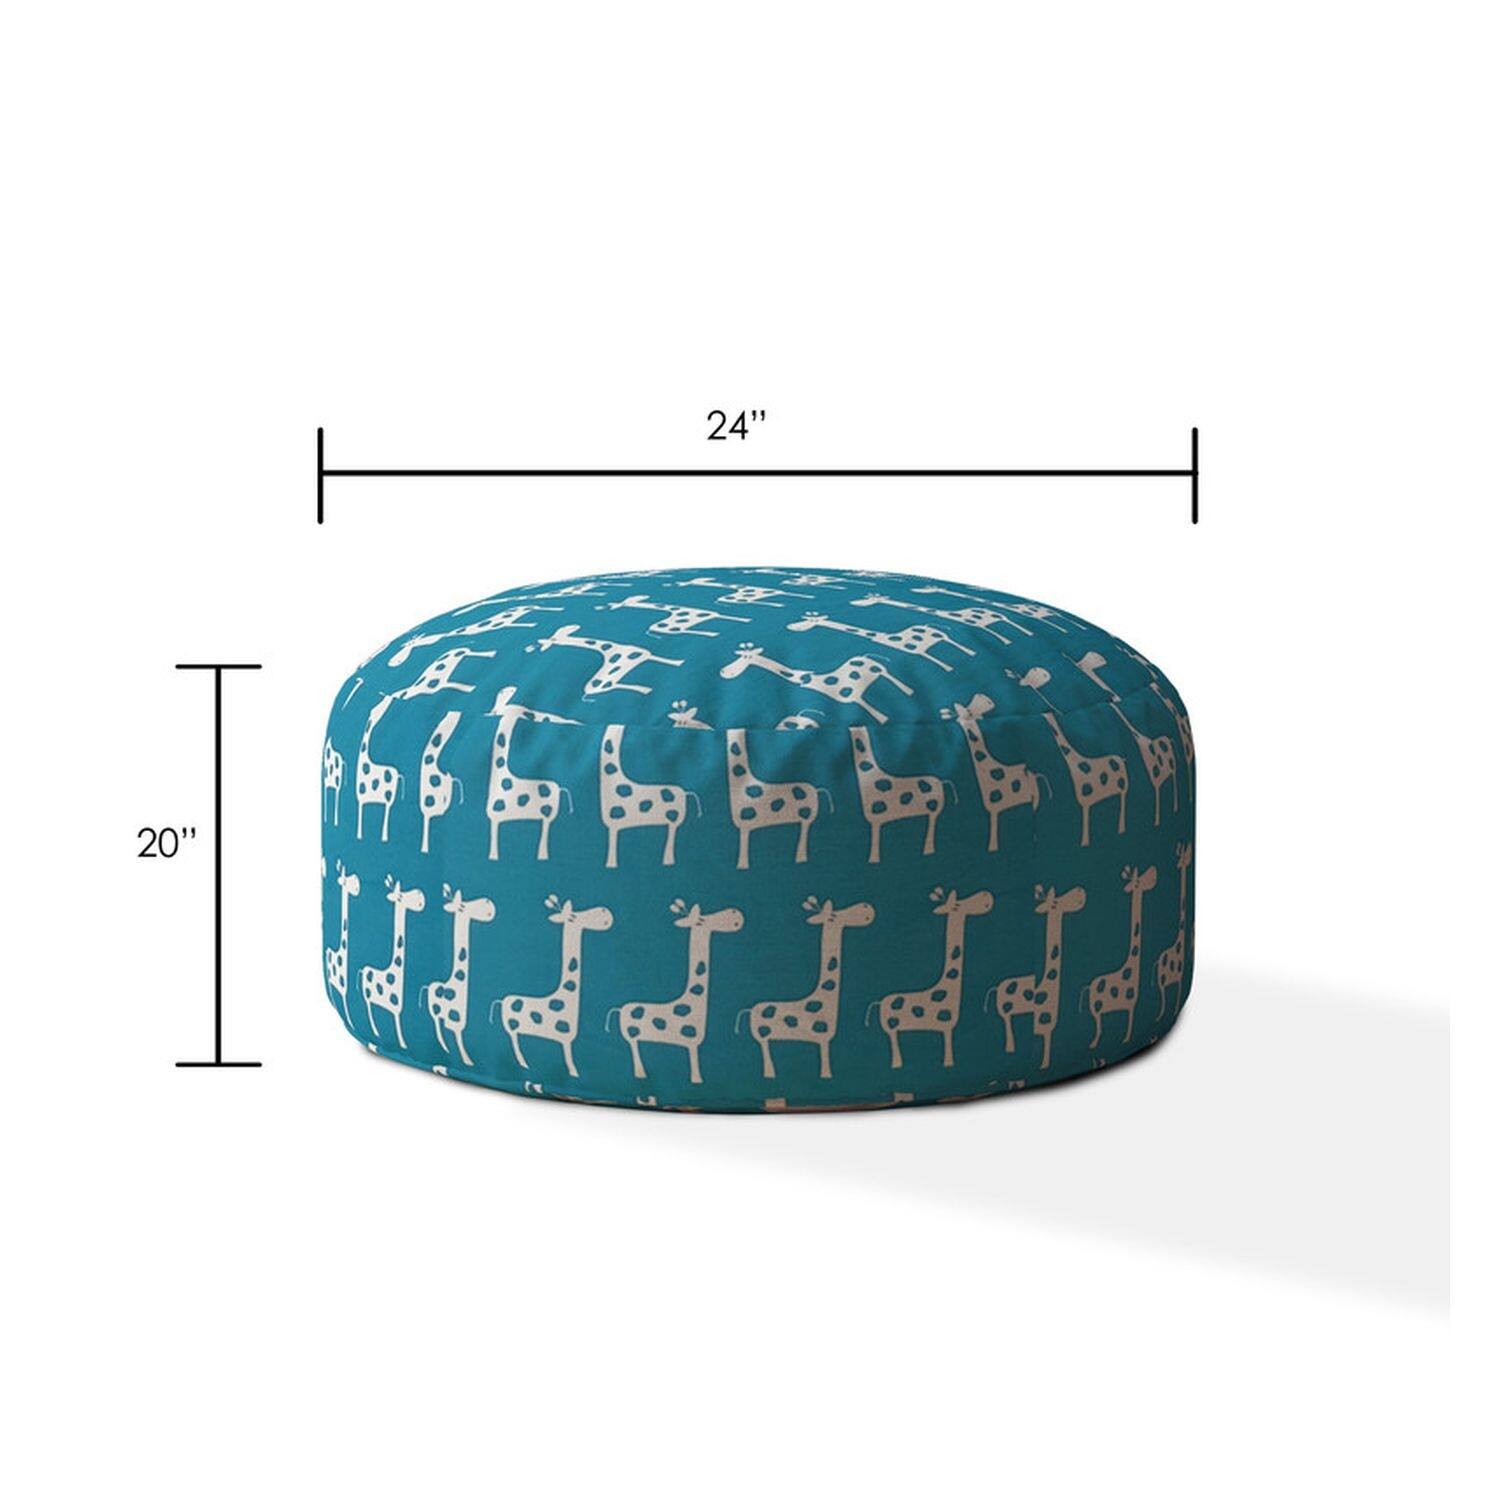 Cotton Fabric Foot Rest Stool Animal Print Bean Bag Ottoman with Hand Sewn Upholstery Zipper for Lounge Makeup Room